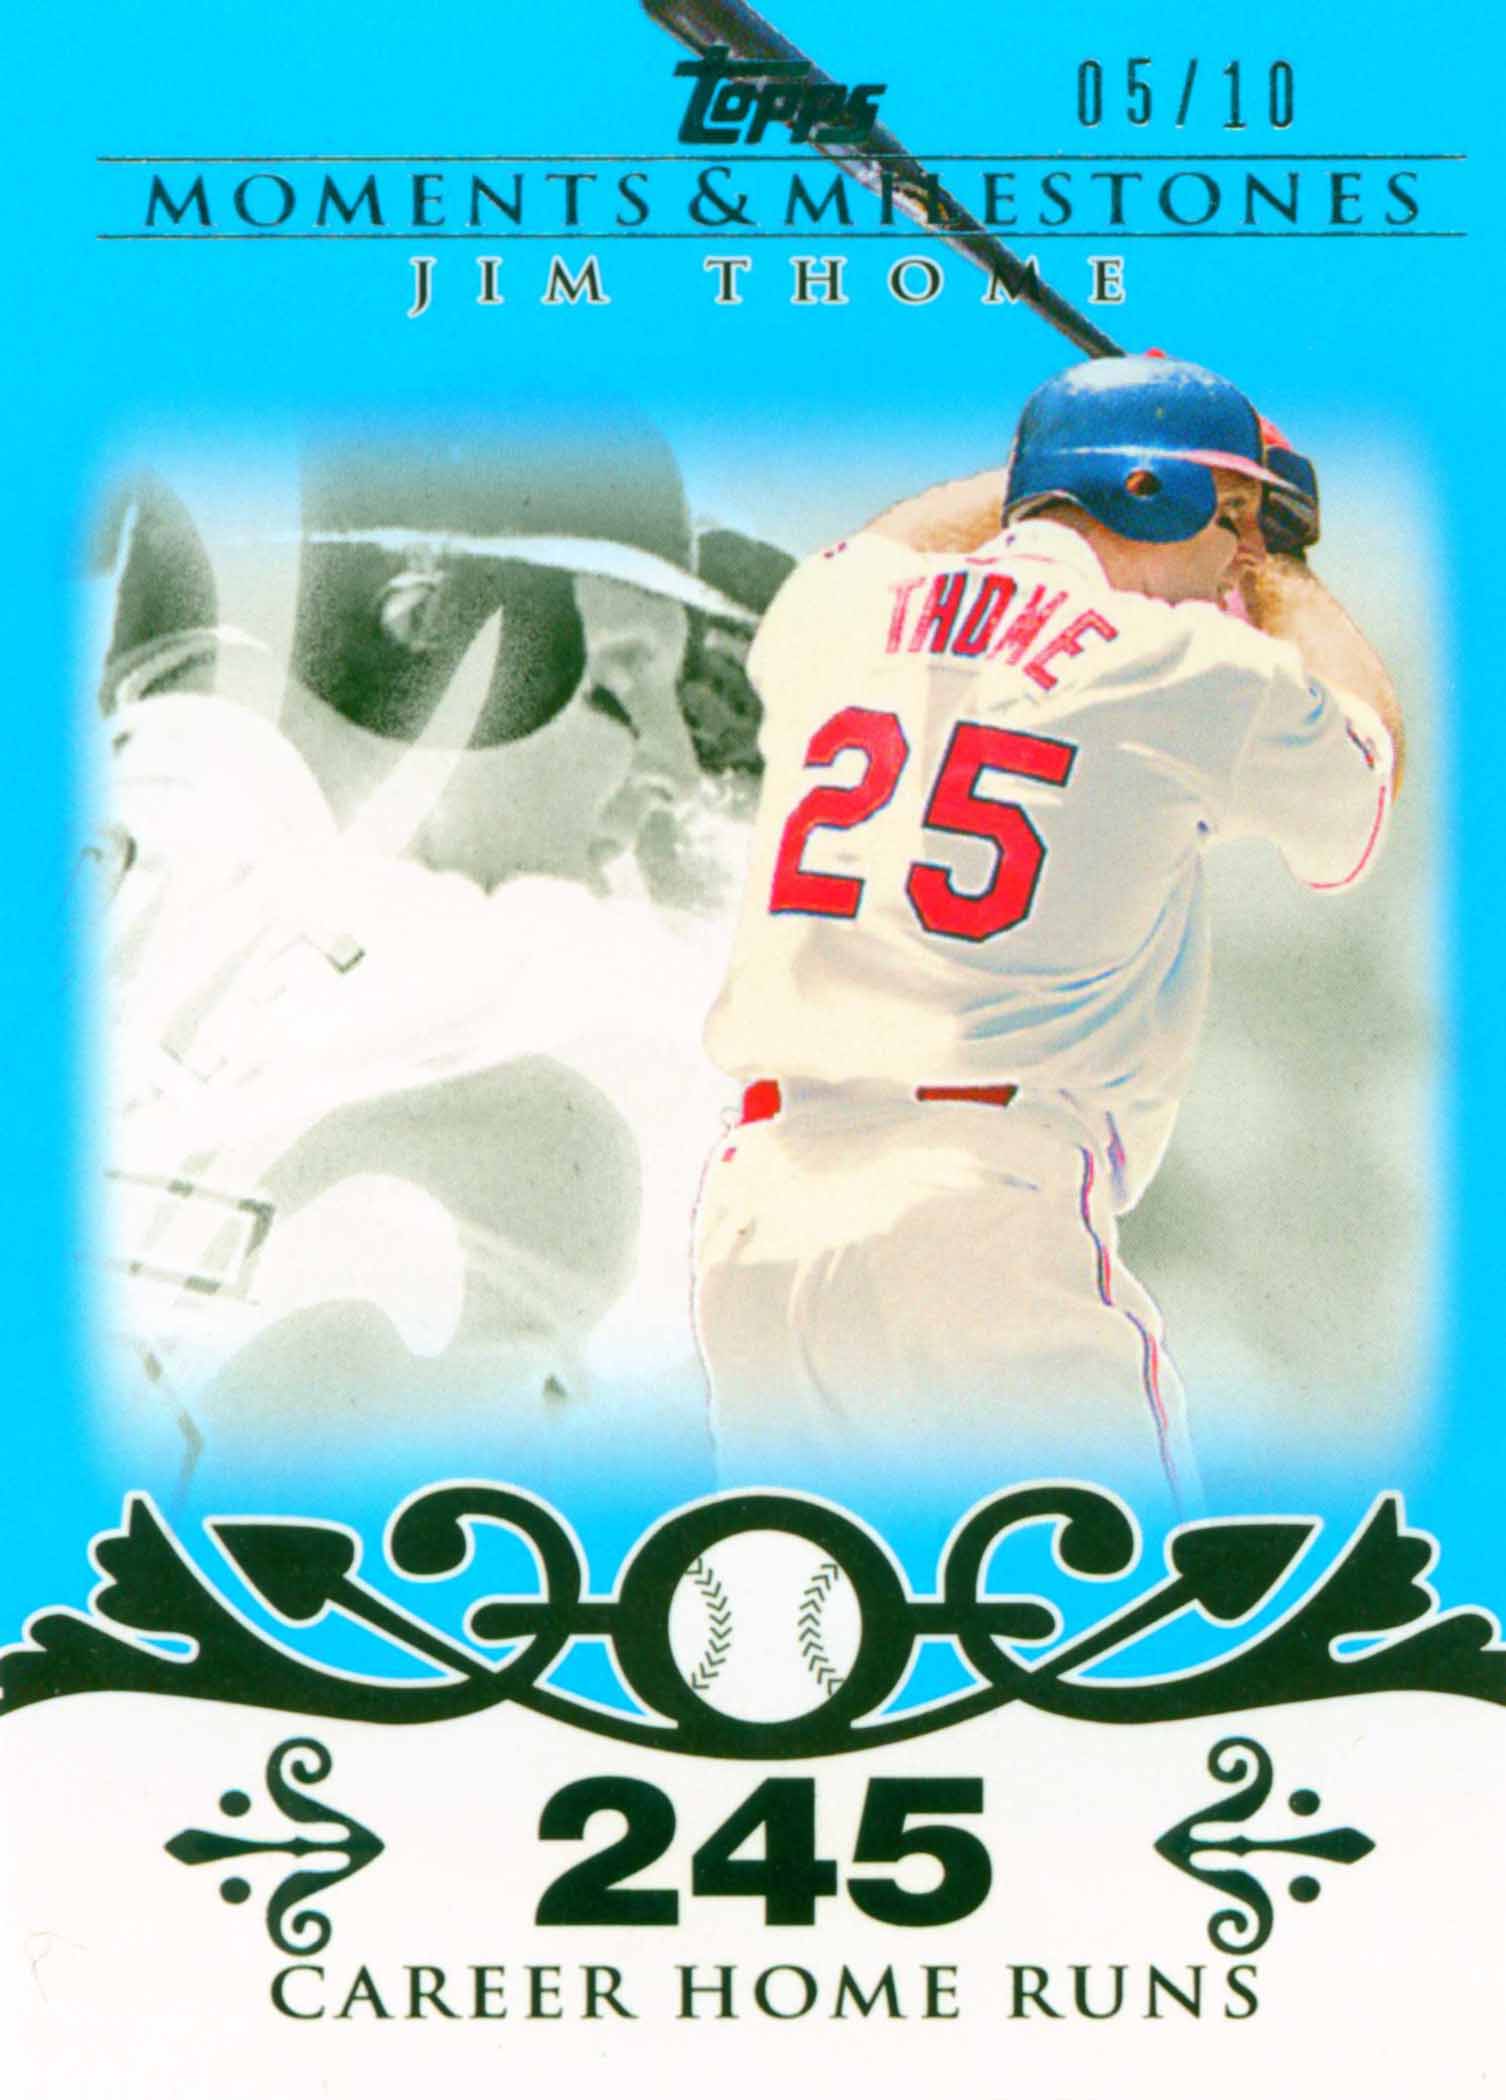 2008 Topps Moments and Milestones Blue